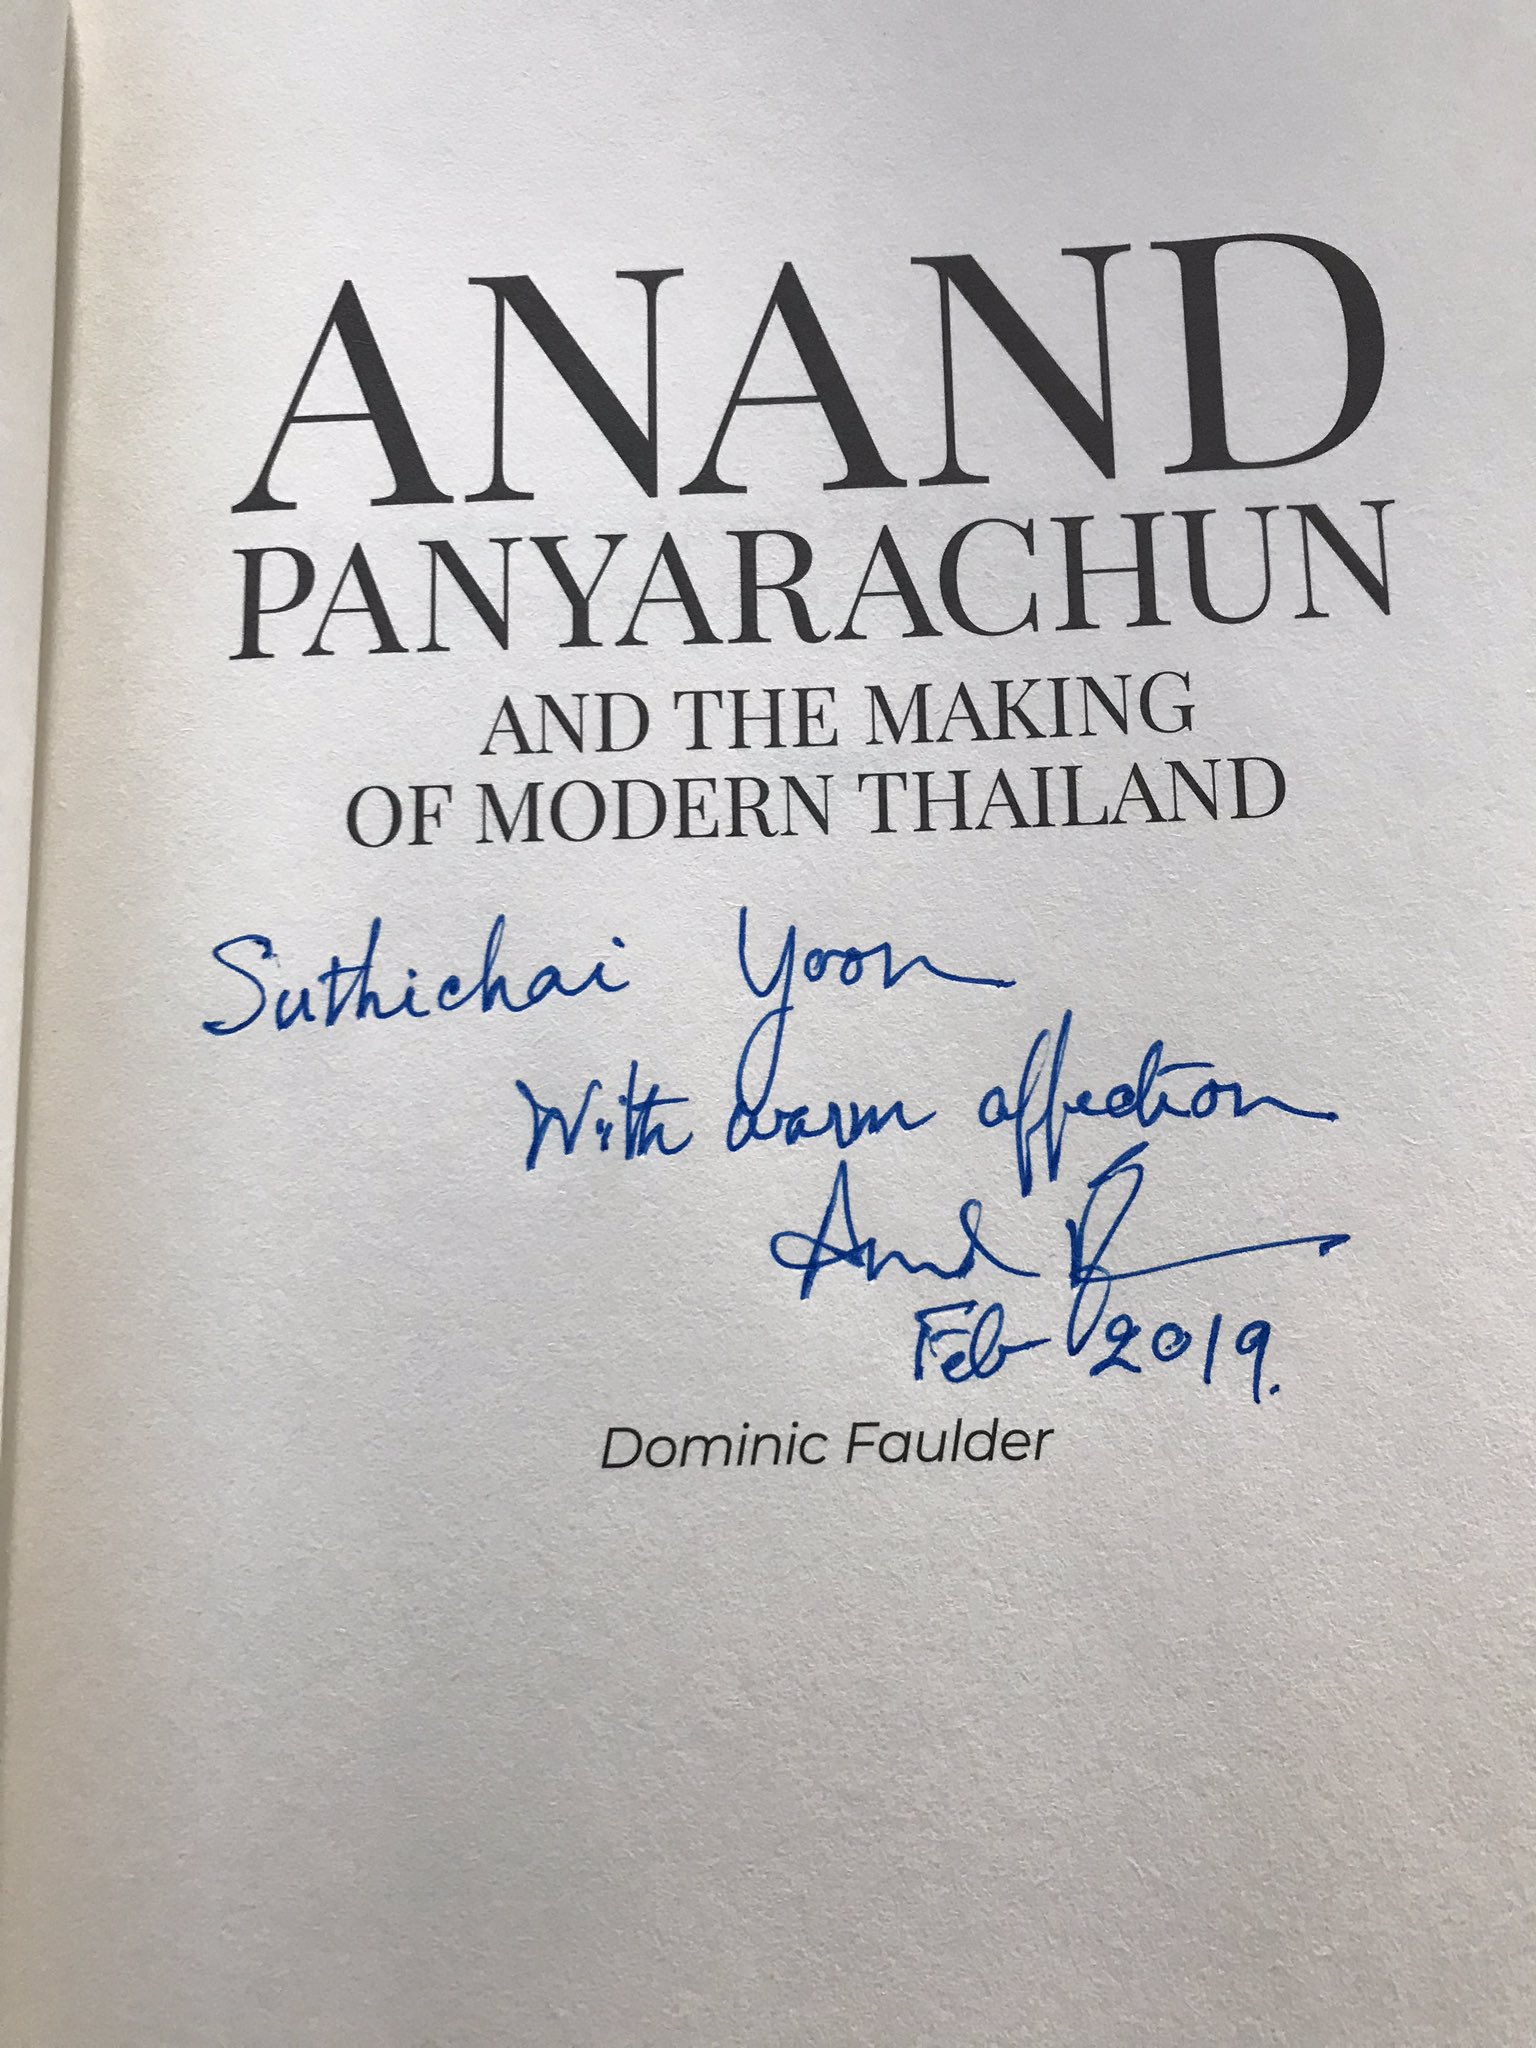 Anand Panyarachun and The Making of Modern Thailand: A Review